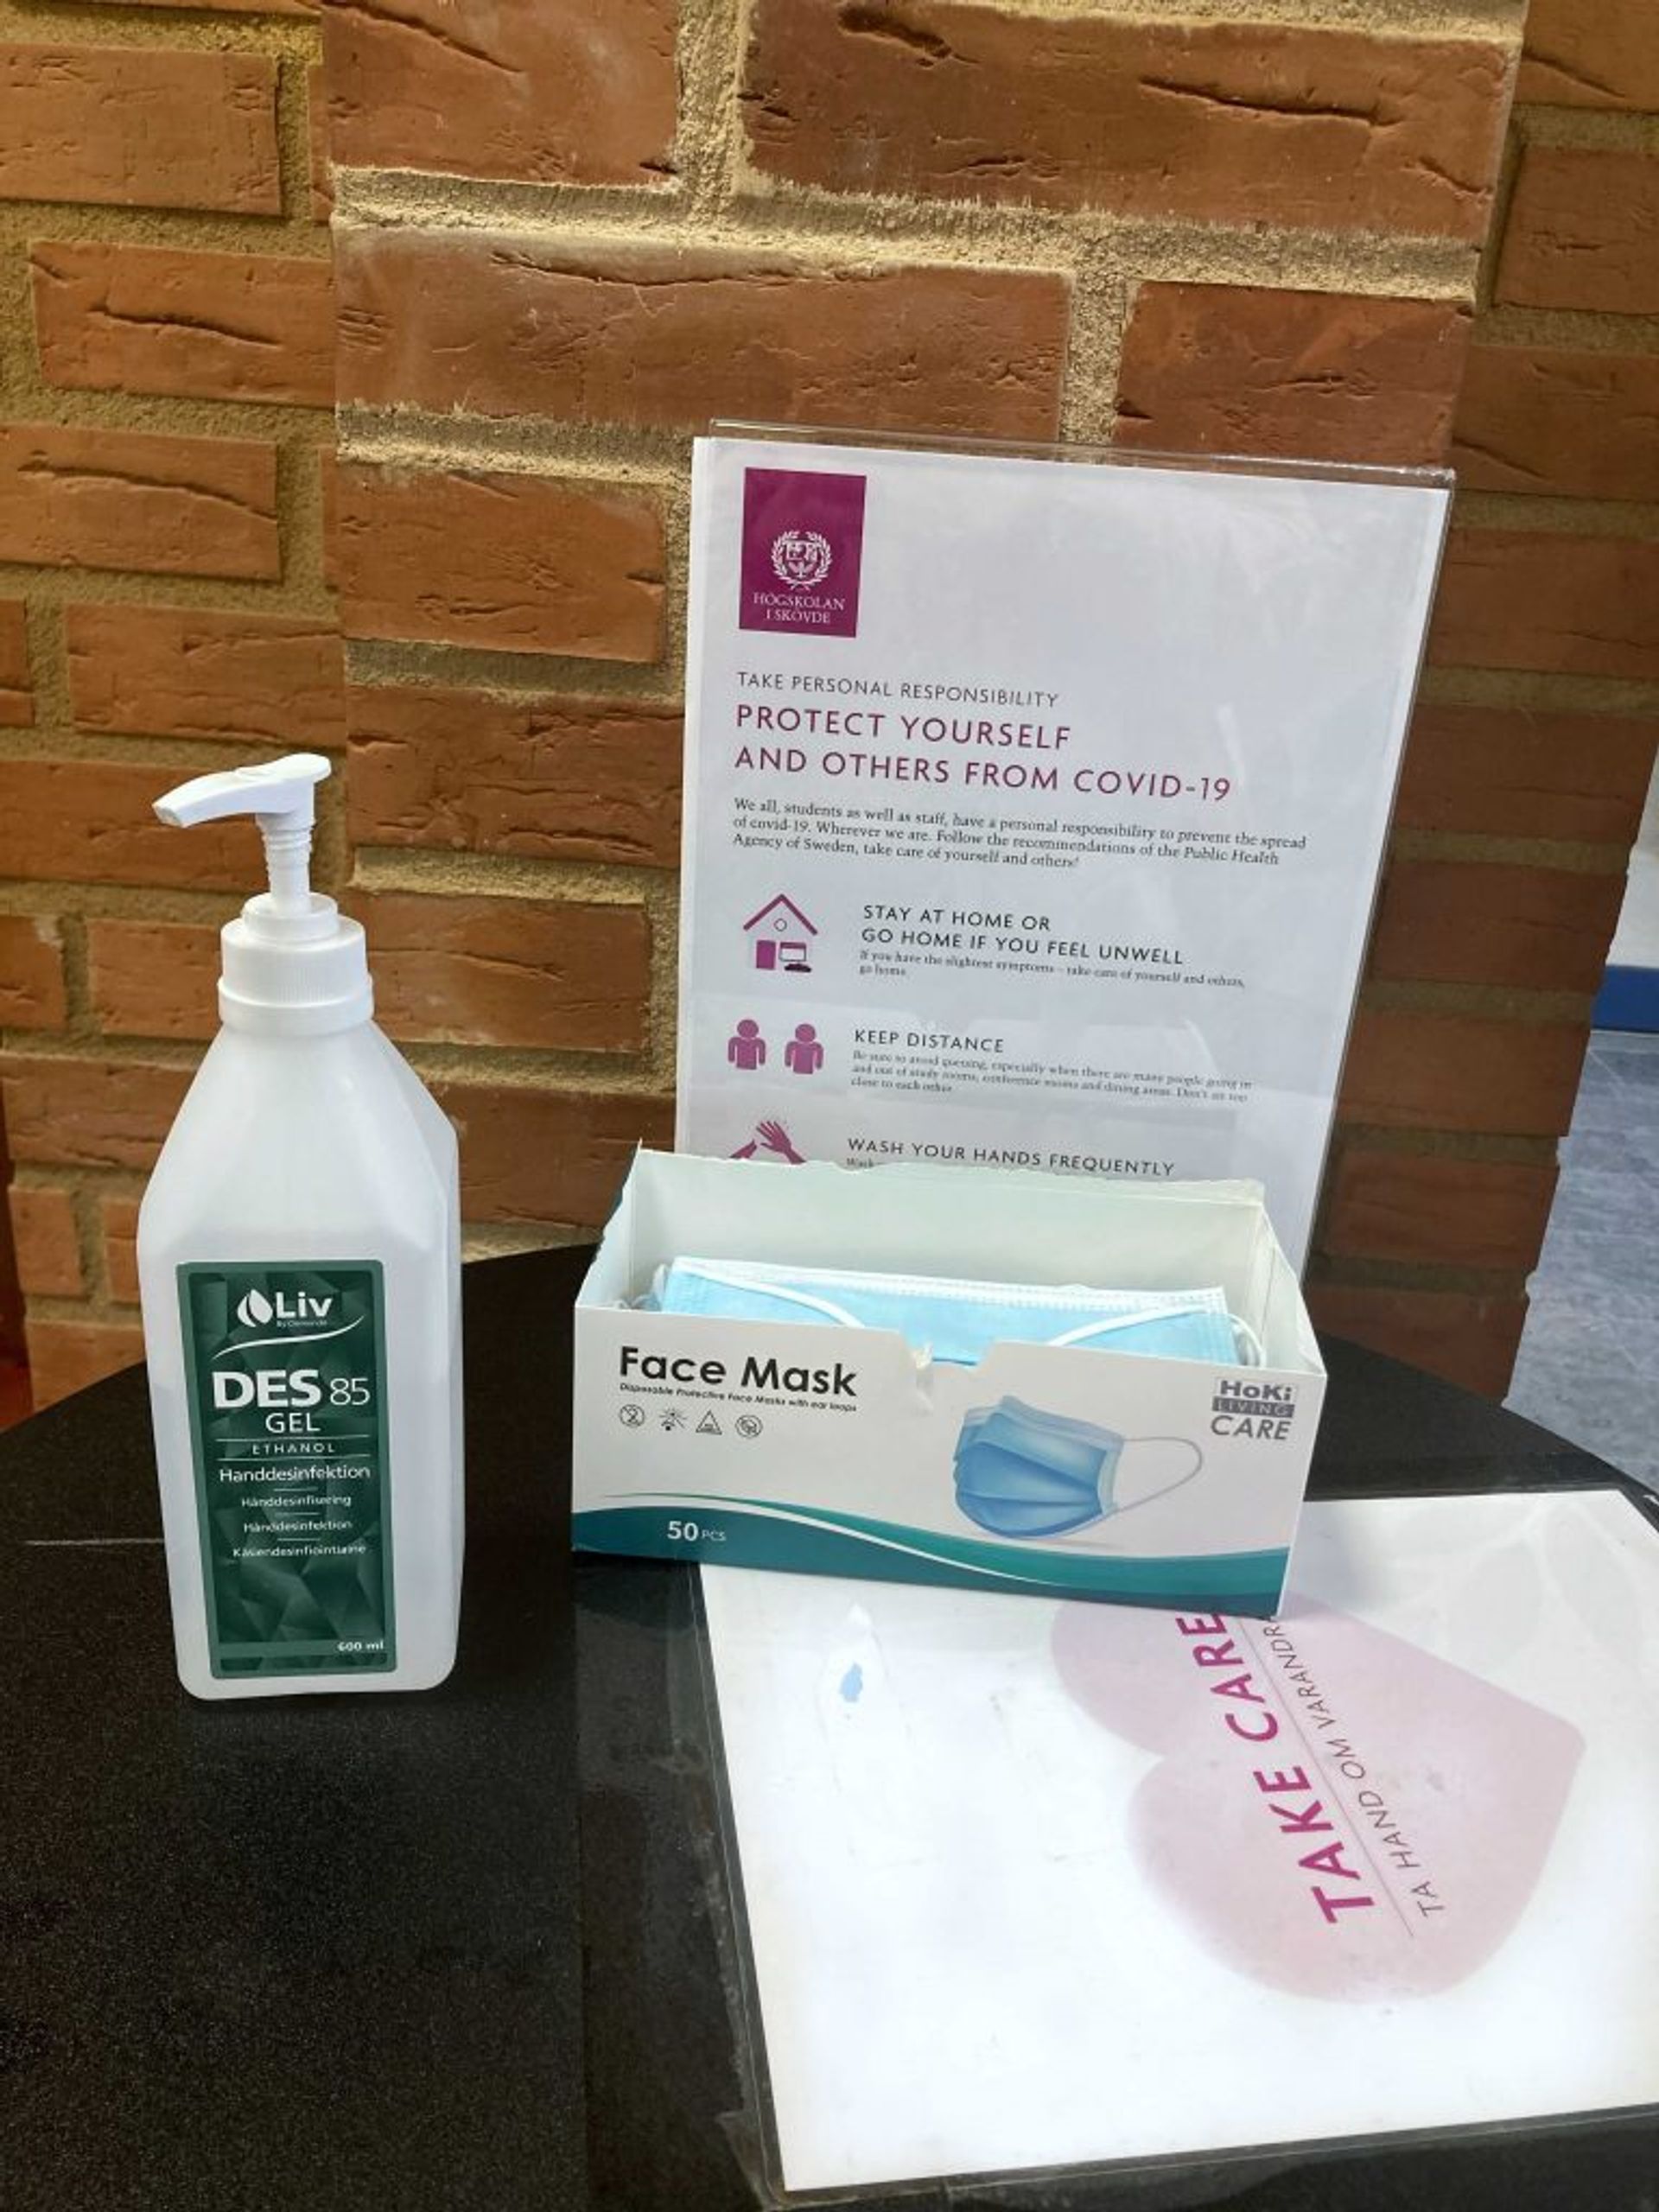 A small table with desinfectant, free face masks, and a sign that recommends to protect yourself and others from COVID-19.